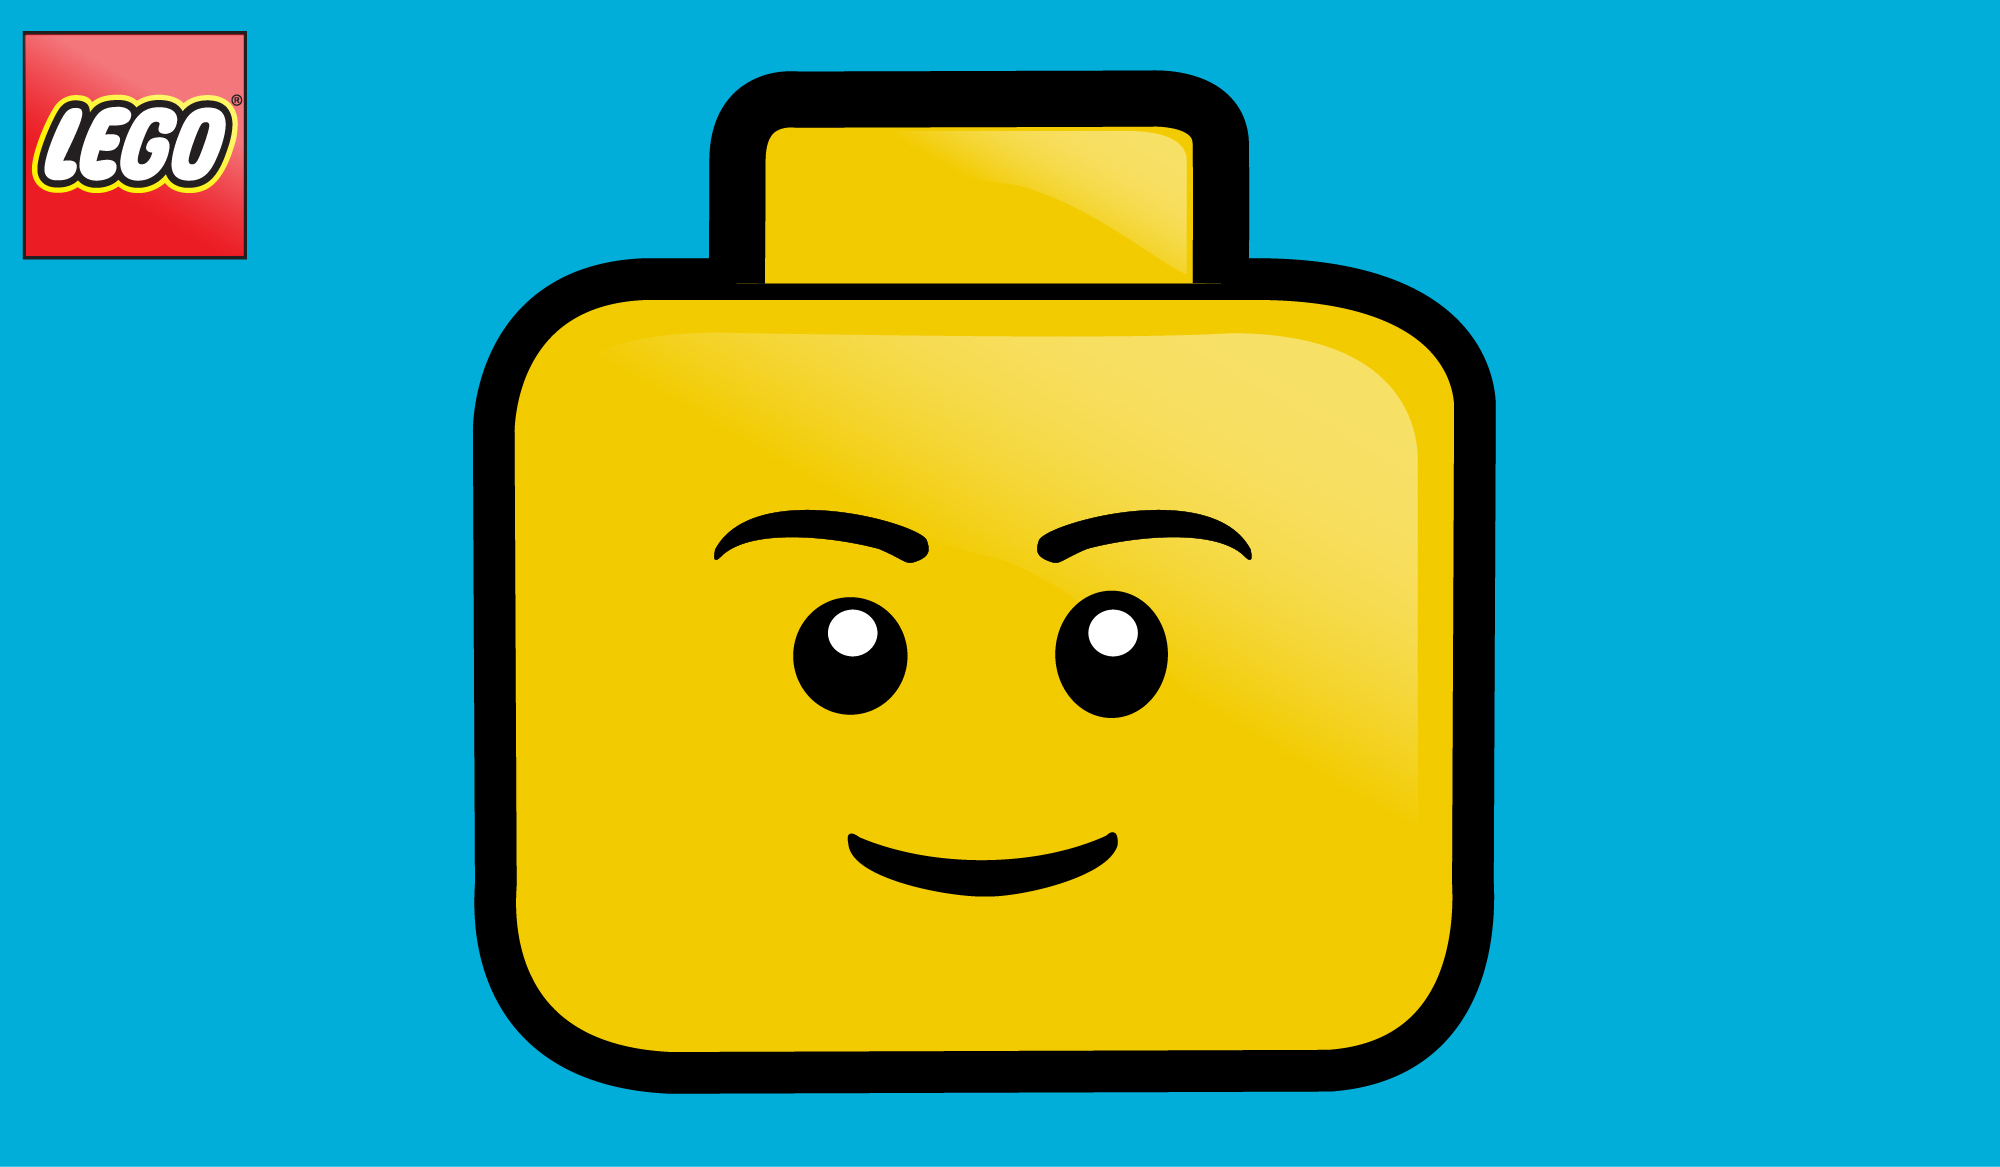 Free Lego Head Png, Download Free Lego Head Png png images, Free ...